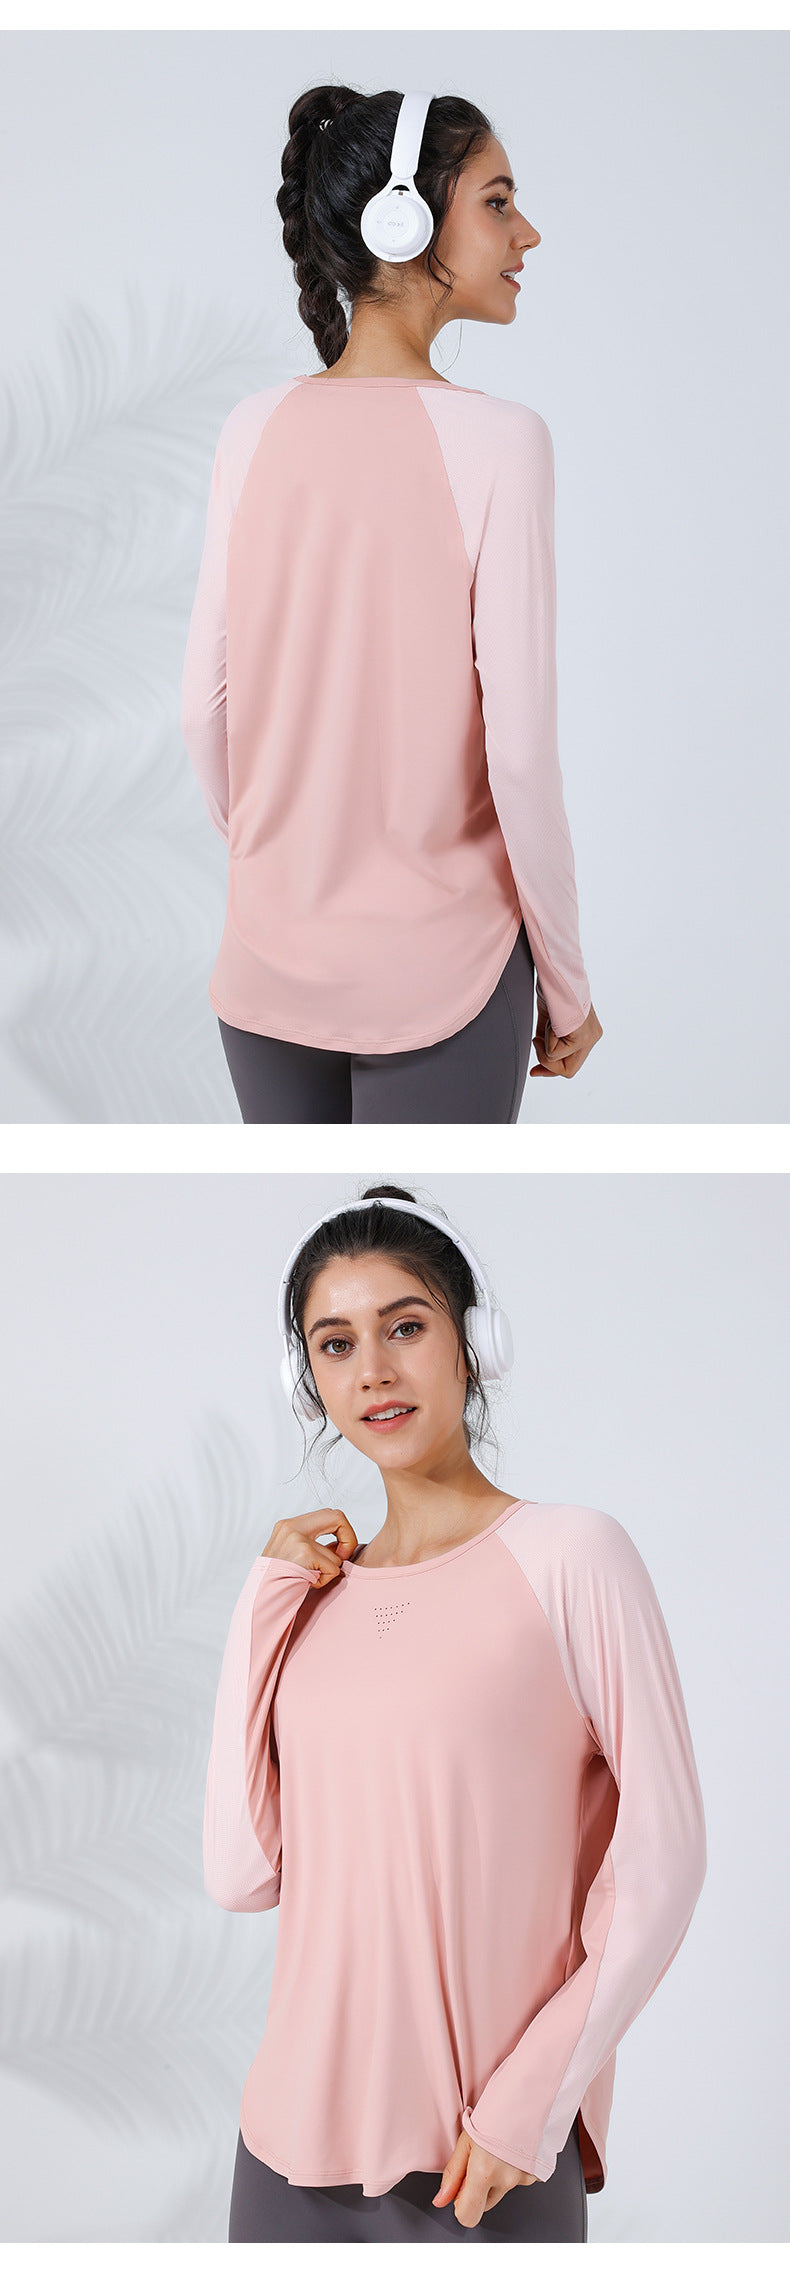 2023.09 Autumn and winter New mix colours stitching loose yoga long sleeve curved hem quick-drying slimming breathable sports top T-shirt